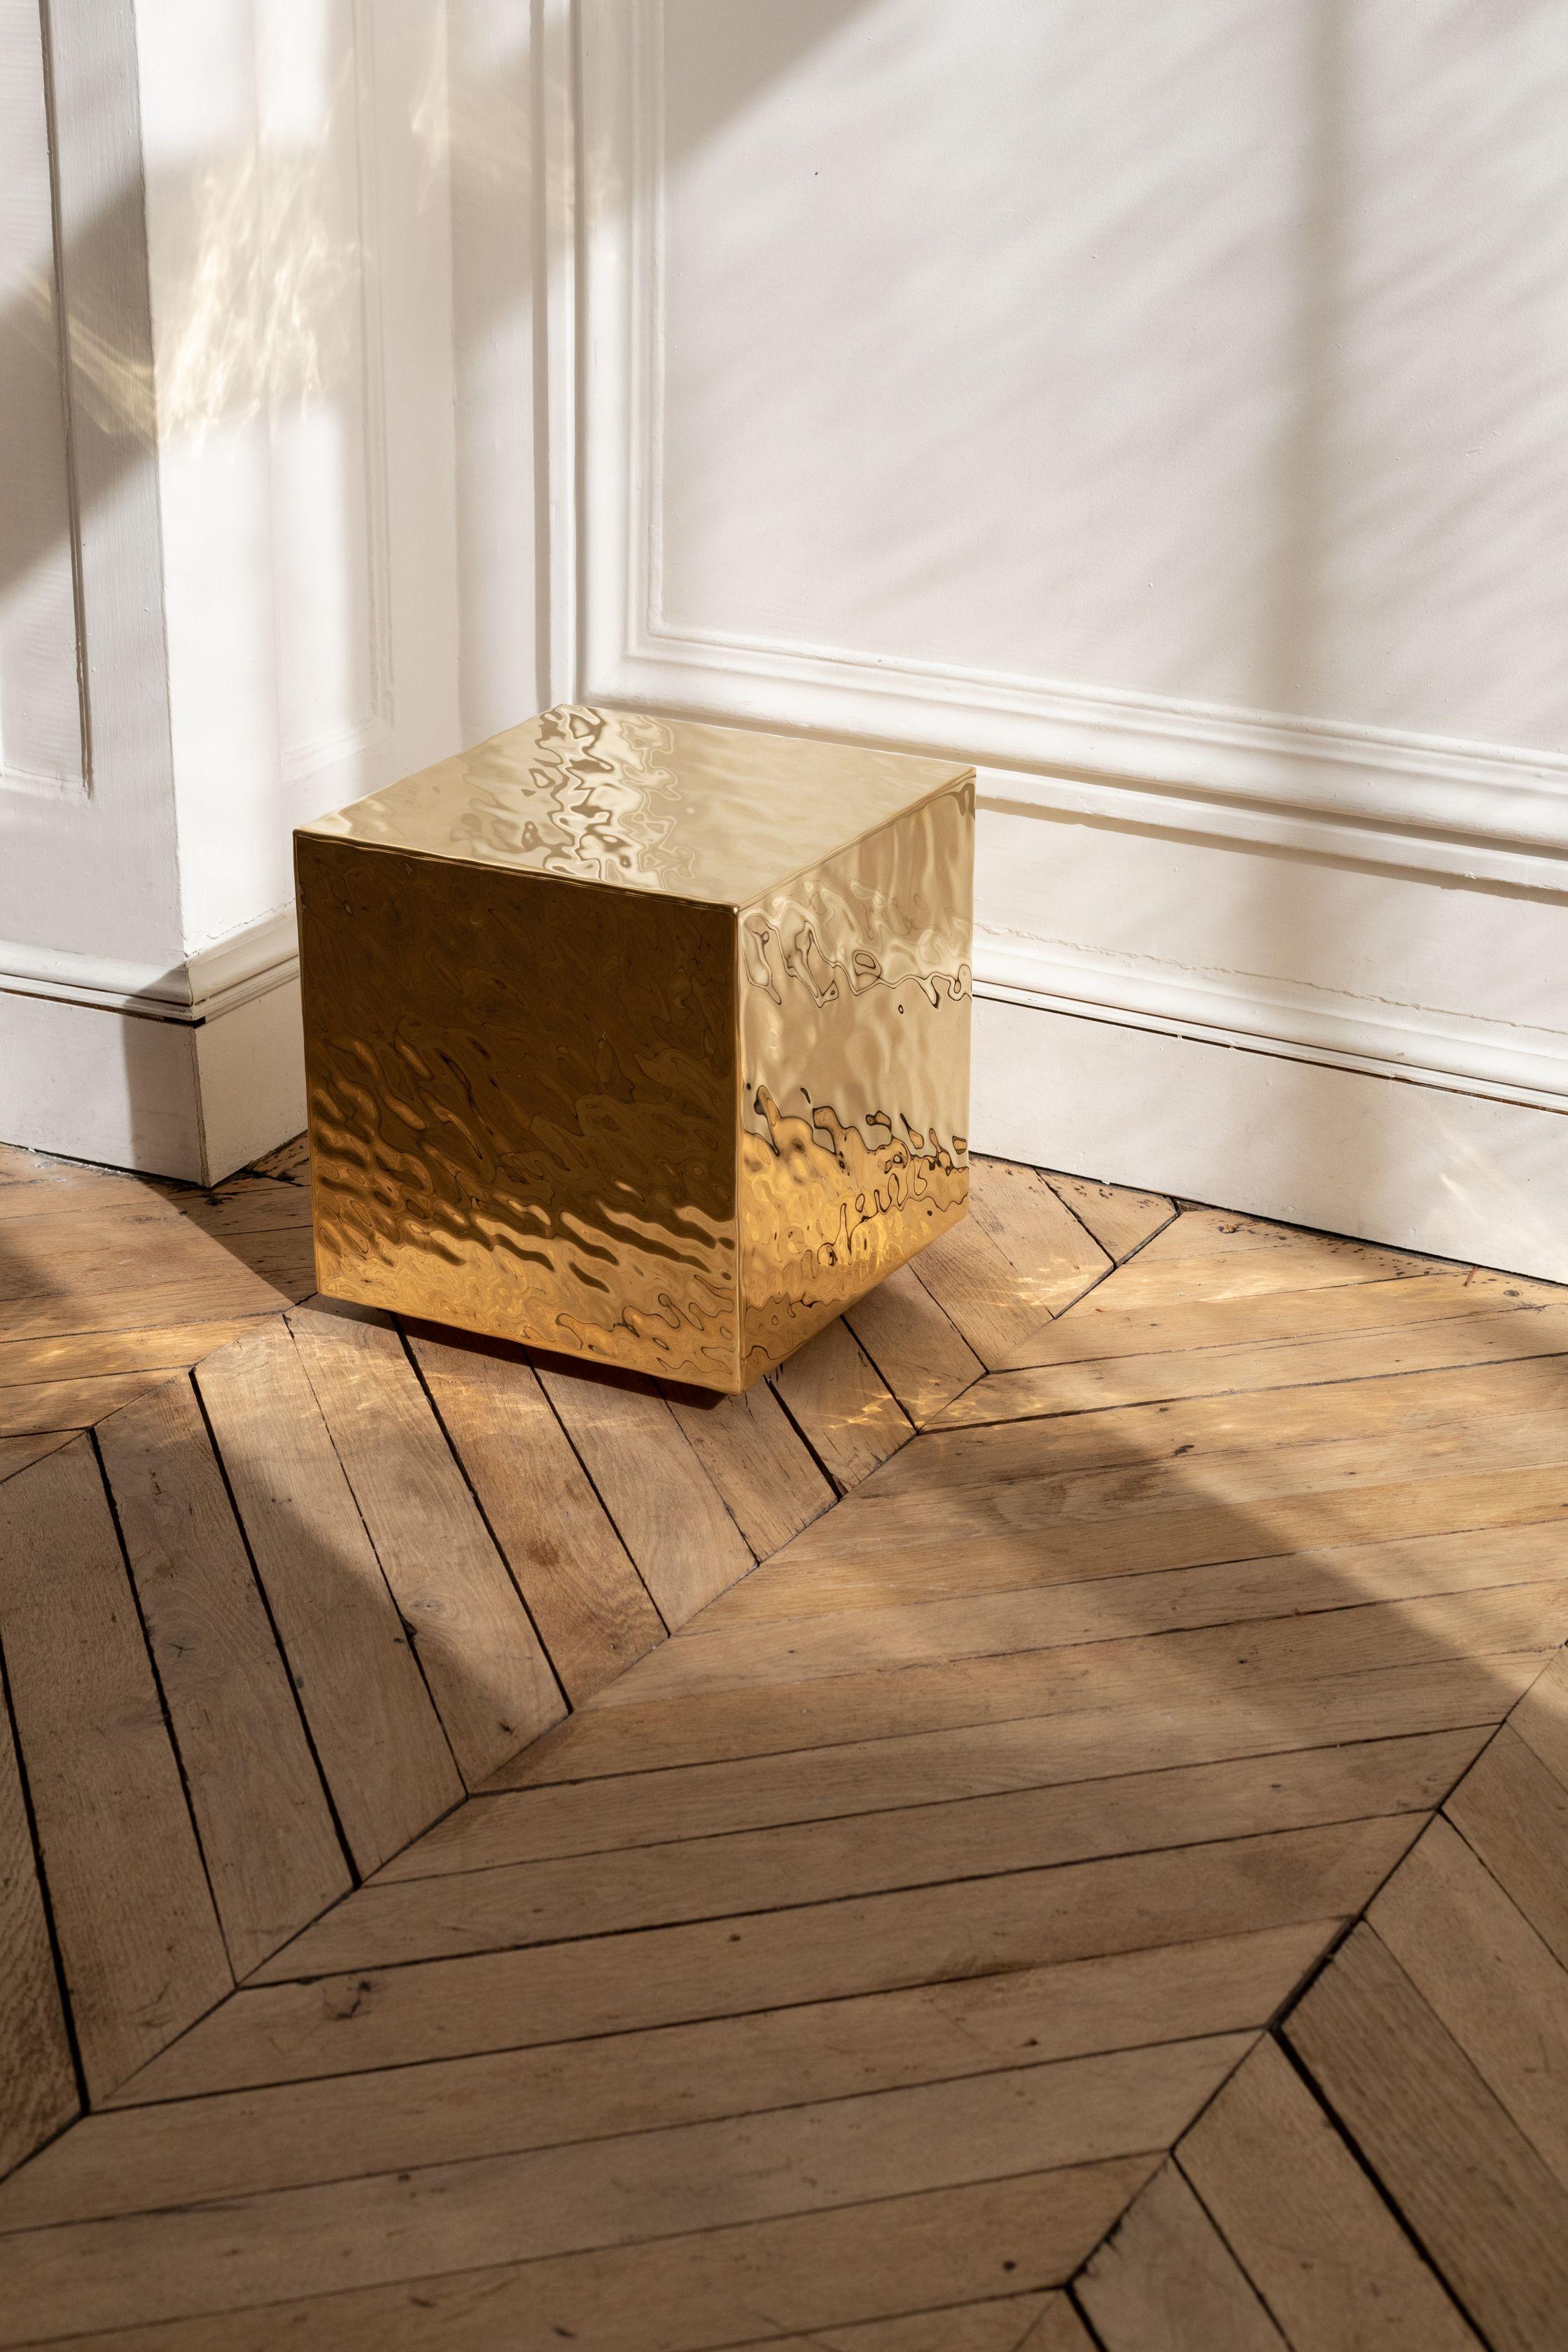 Liquide side table by Mydriaz
Dimensions: W 30 x L 30 x H 32cm
Materials: Brass
Finishes: Golden-plated polished brass, white nickel finish on polished brass, black nickel finish on polished brass
16 kg

Our products are handmade in our